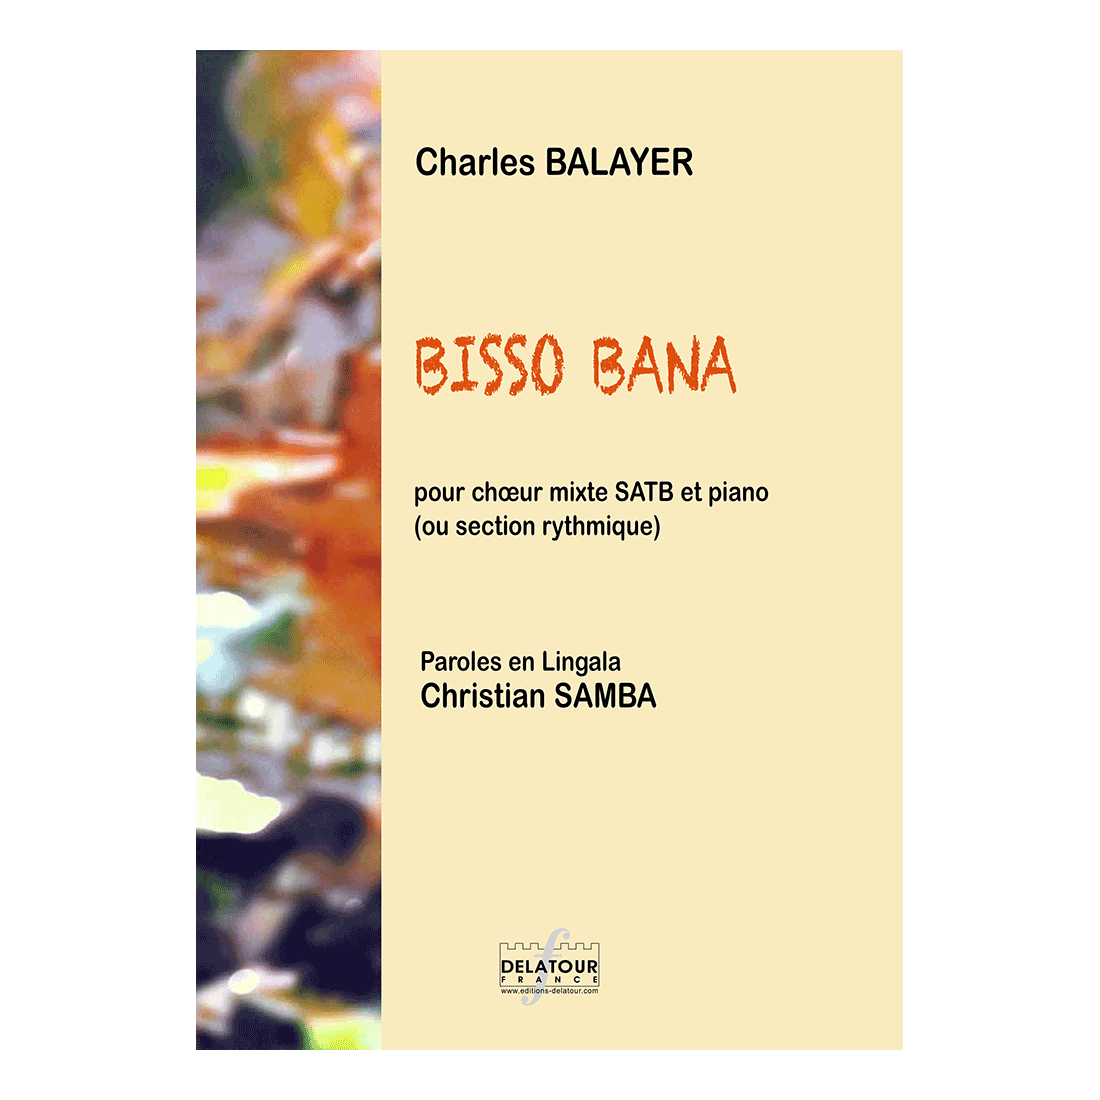 Bisso bana for mixed choir SATB and piano